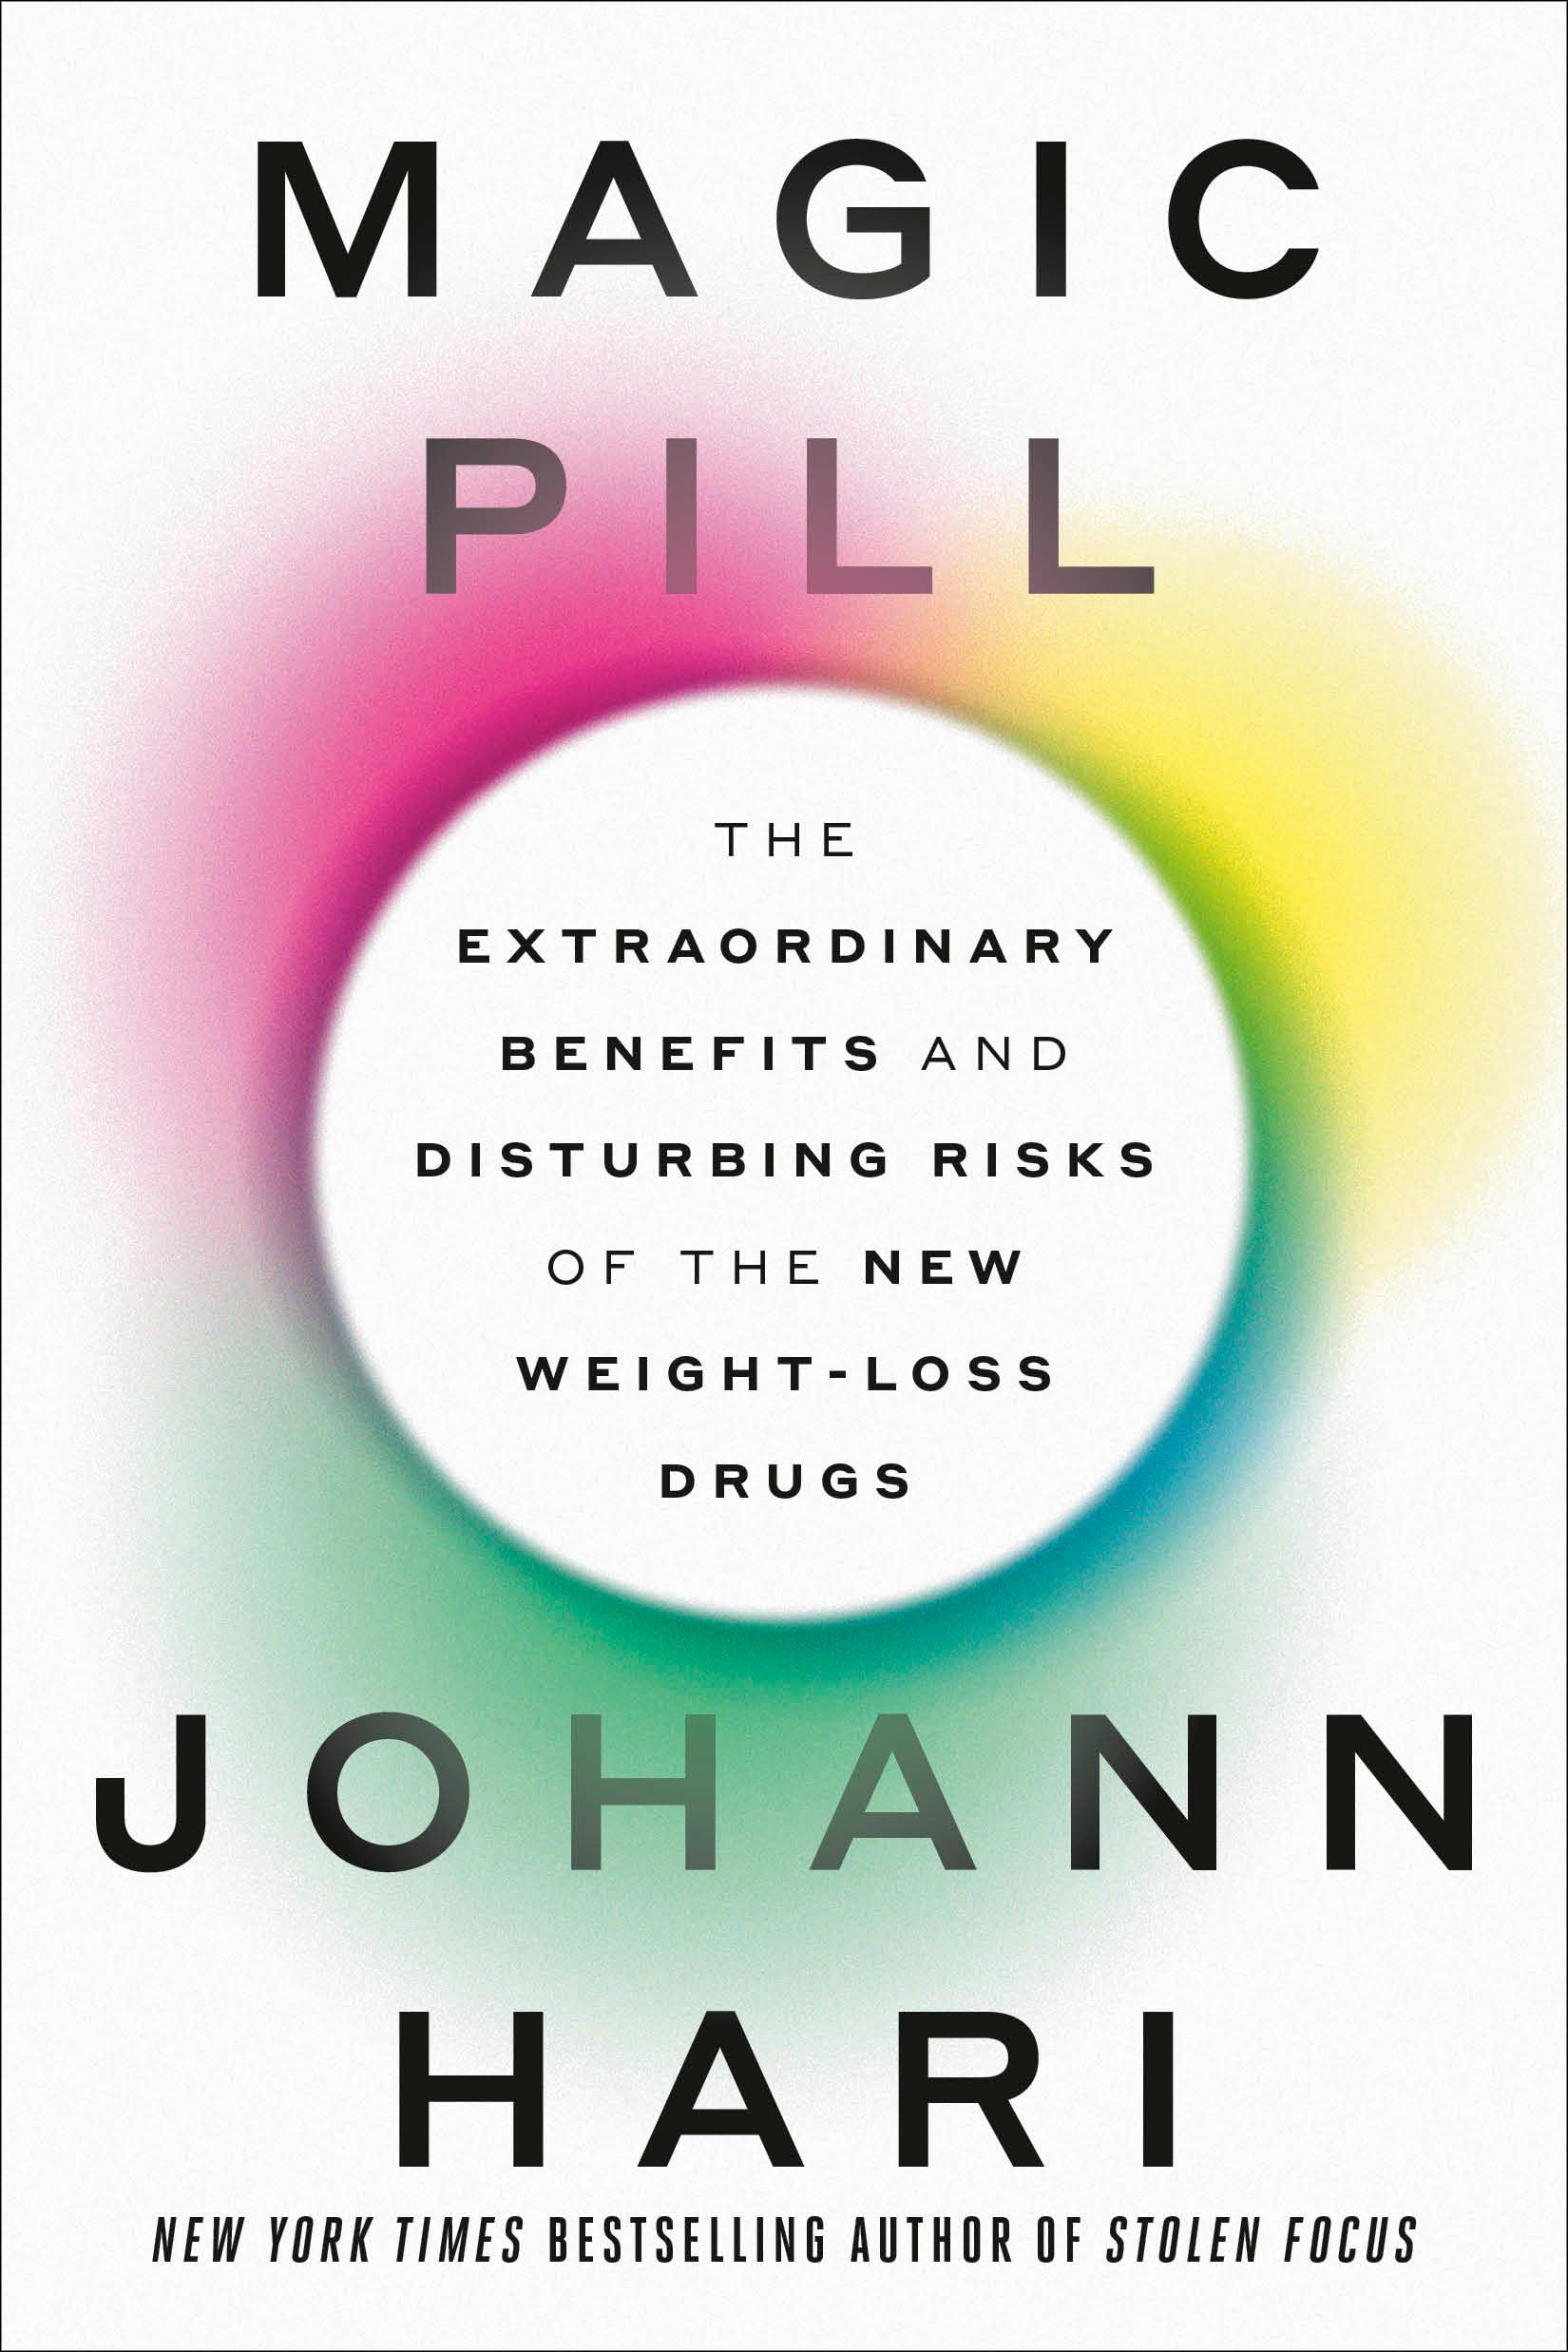 Magic Pill: The Extraordinary Benefits and Disturbing Risks of the New Weight-Loss Drugs by Hari, Johann